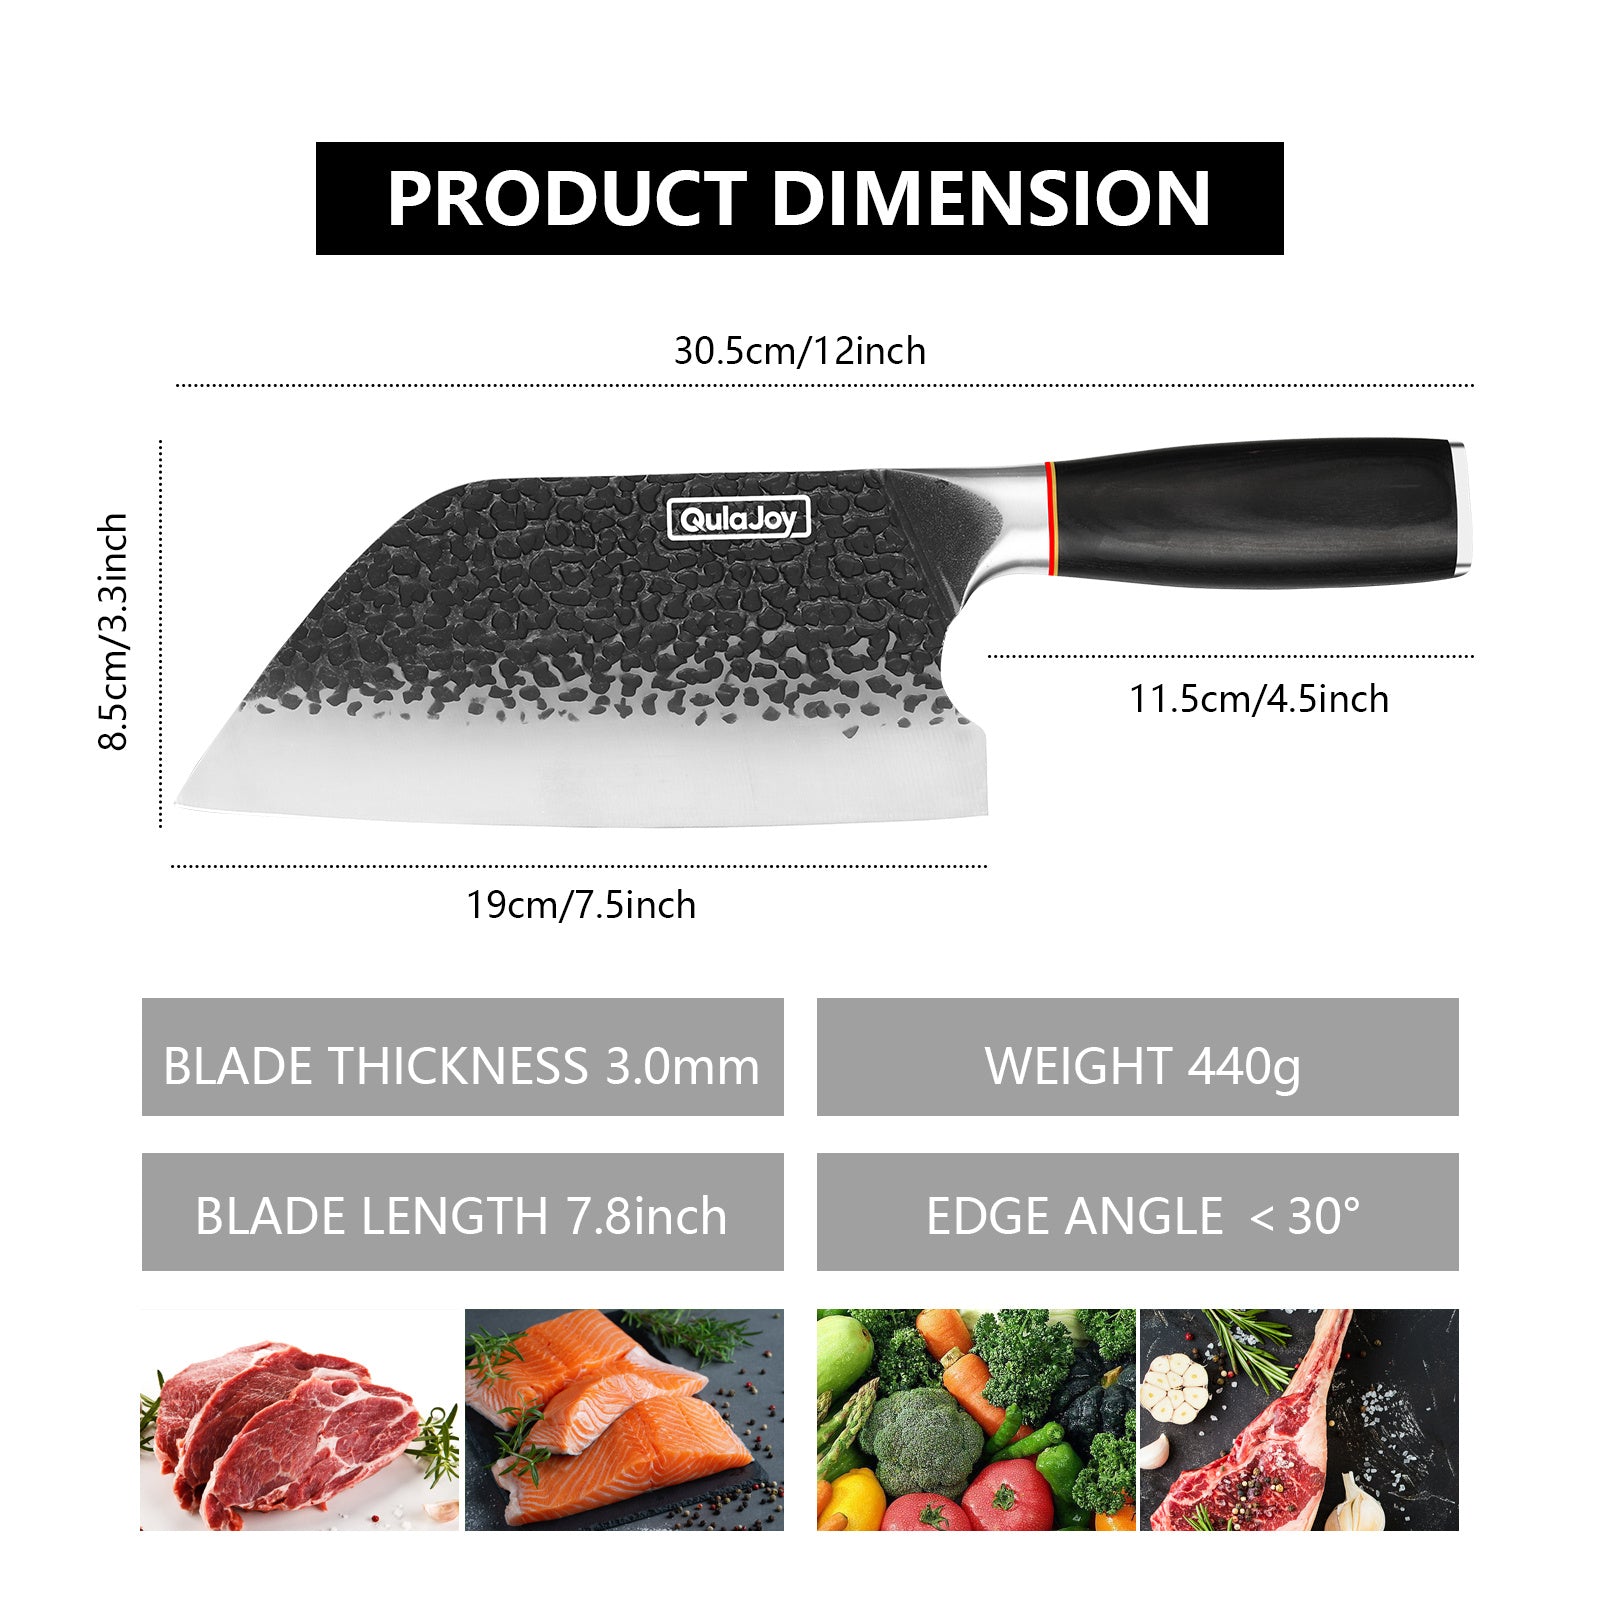 Qulajoy Meat Cleaver Knife - 7.3 Inch High Carbon Stainless Steel Butcher Knife